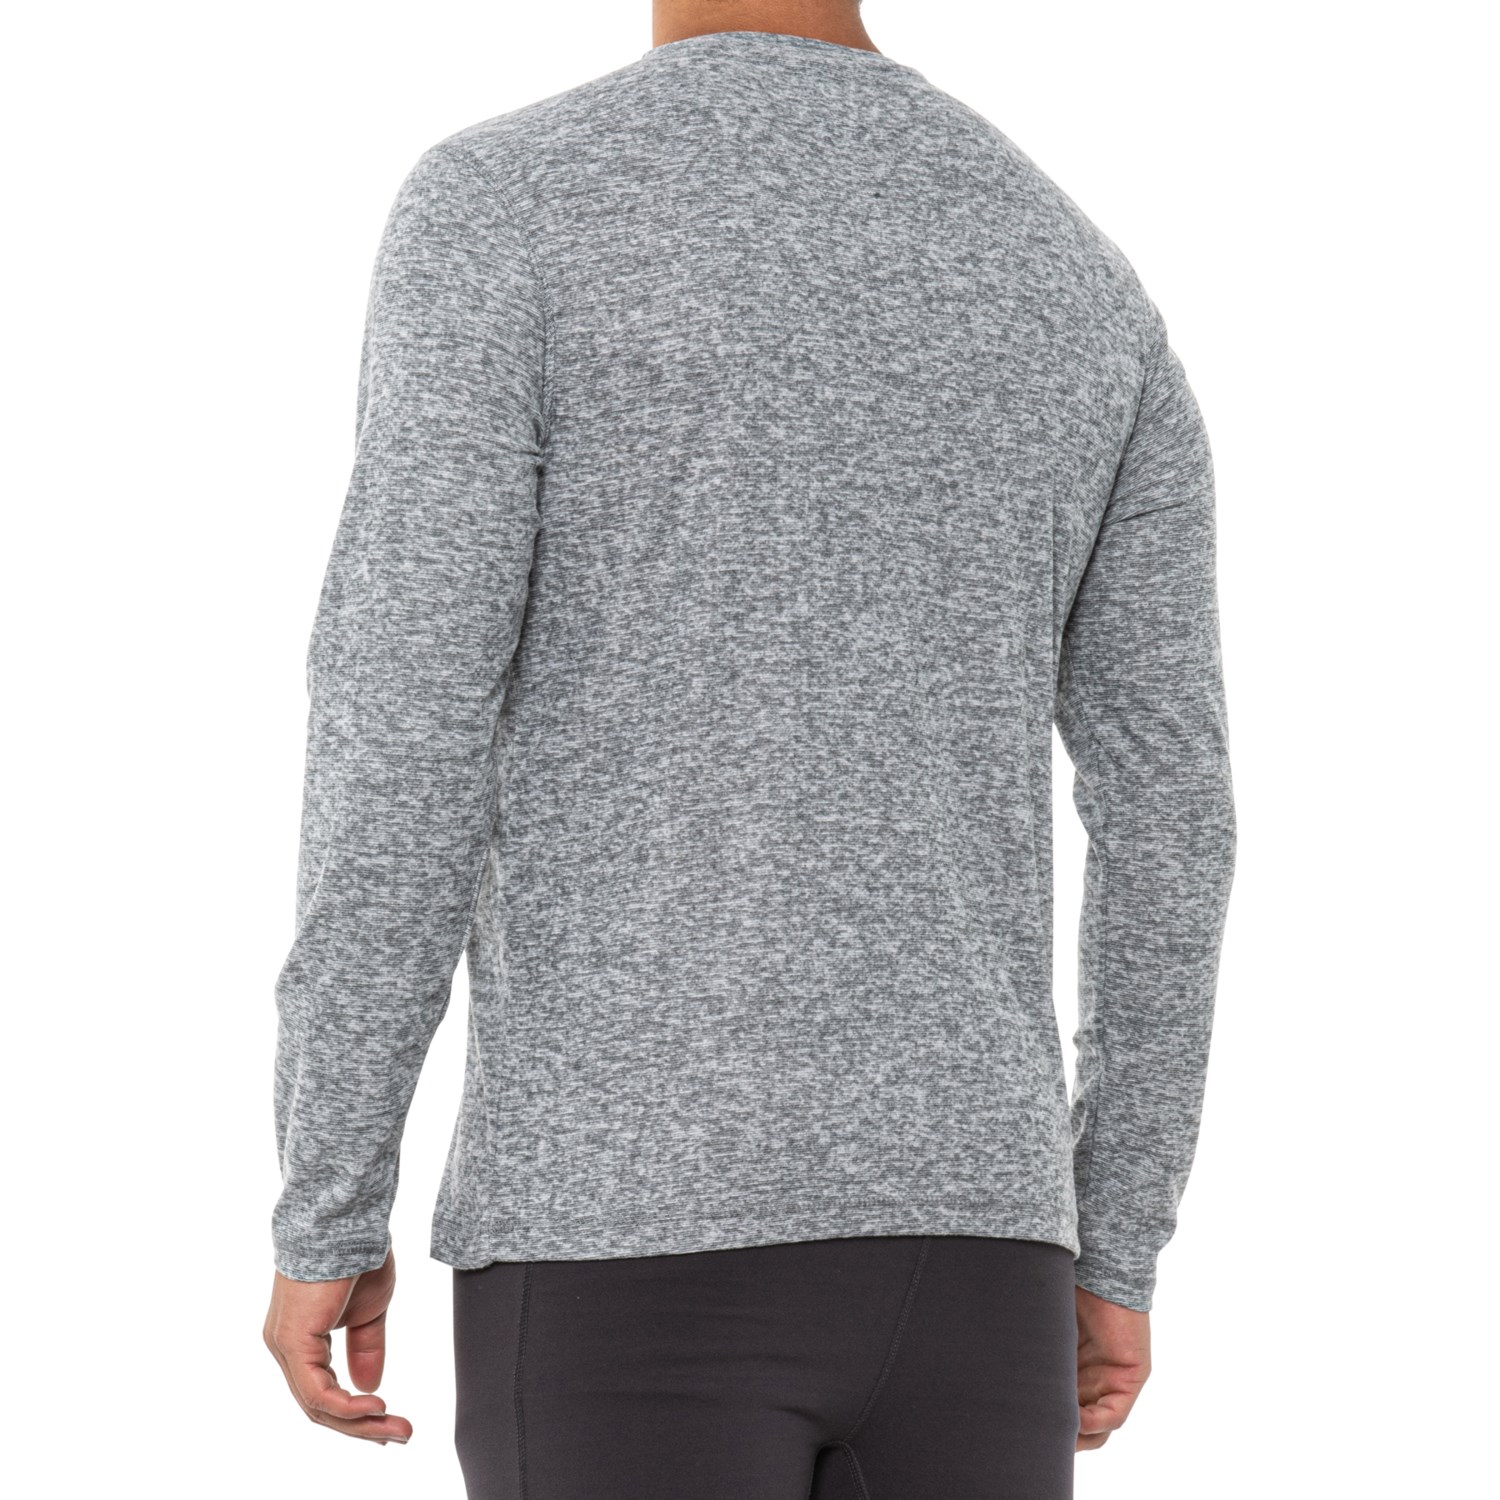 Essex Crossing Supersoft Henley Shirt (For Men) - Save 35%